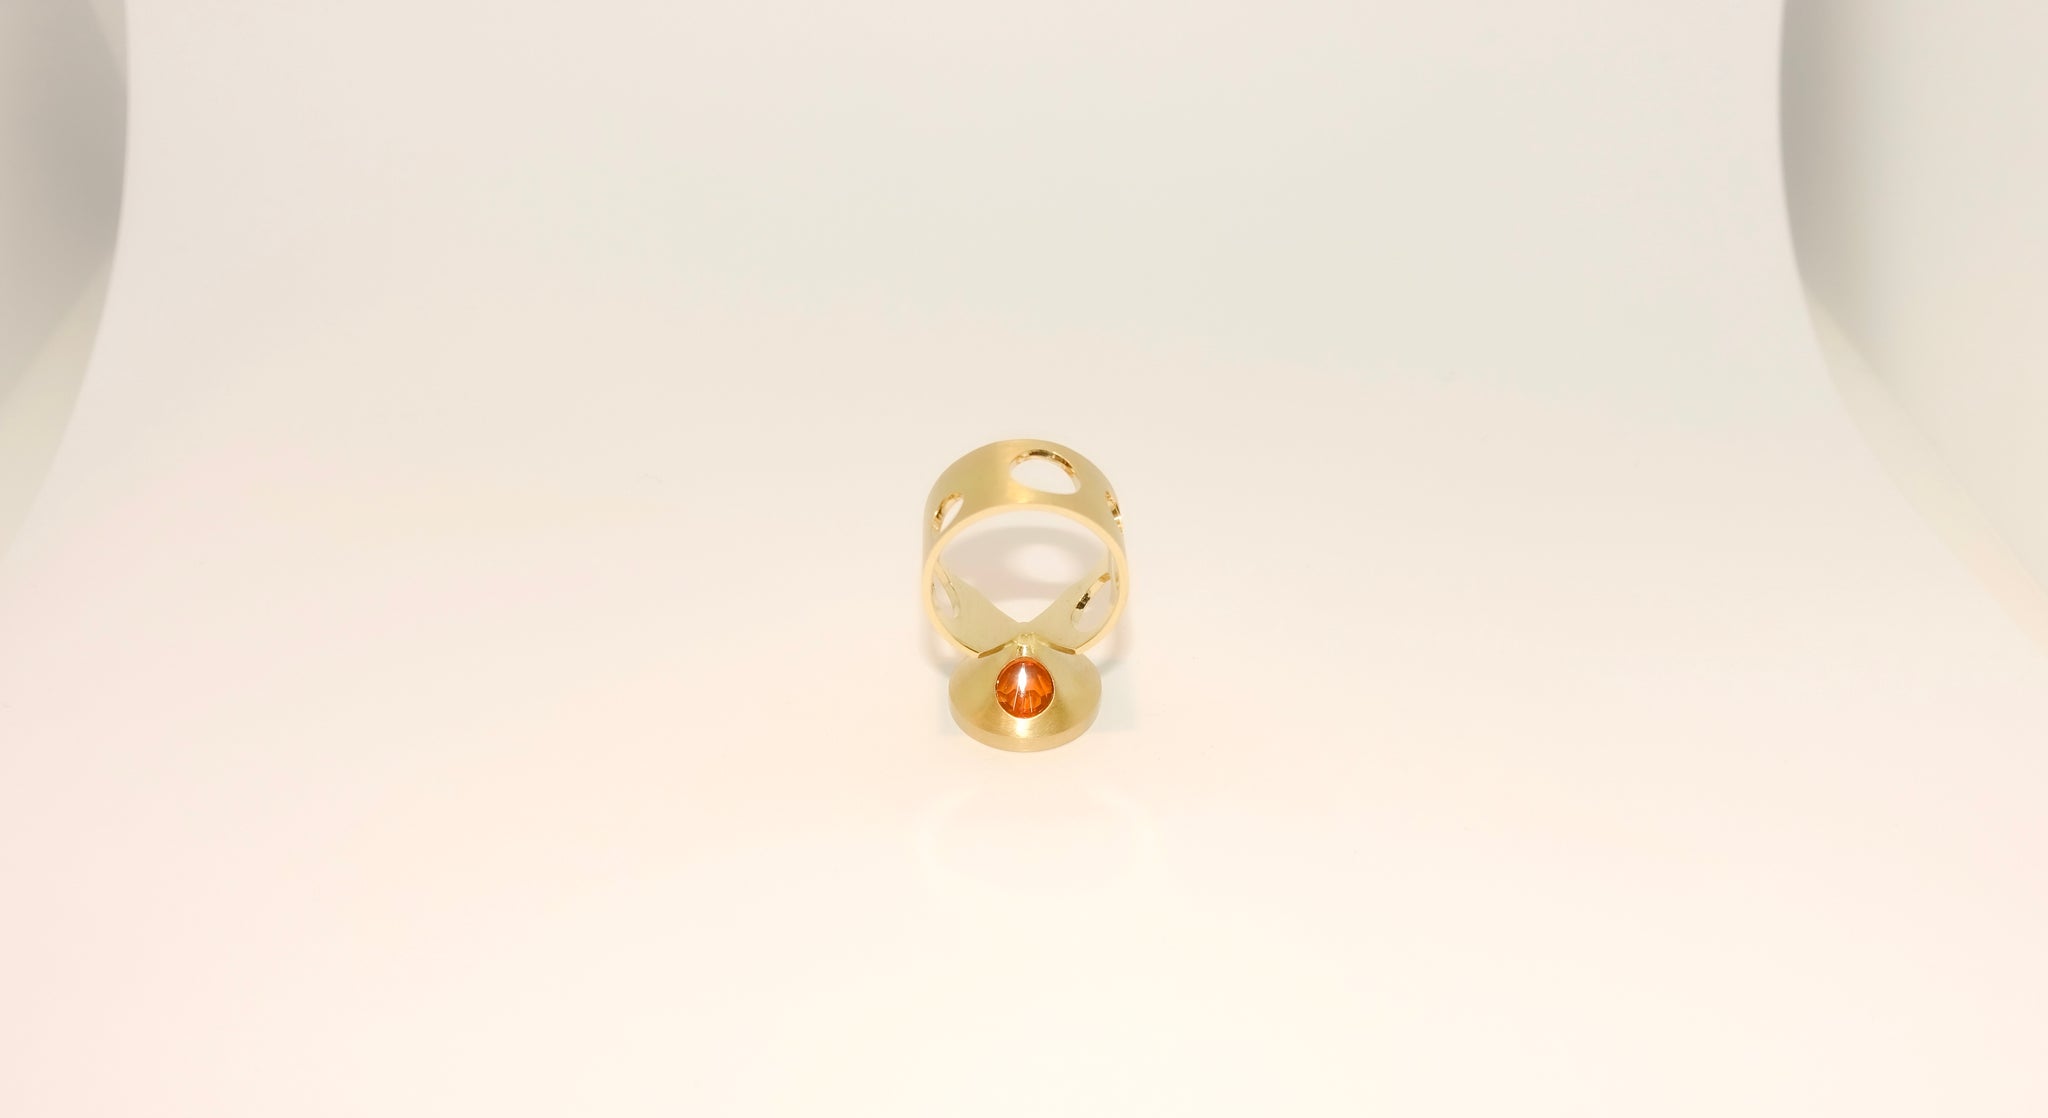 Betelgeuse Fire Opal Ring in 18K vivid yellow gold holds a hypnotic bespoke concave round brilliant from the state of Oregon in the USA. This fire dragon’s eye opal gleams with an inextinguishable fiery orange light. Hand-cut and finished to a very high level with 100k diamond polish